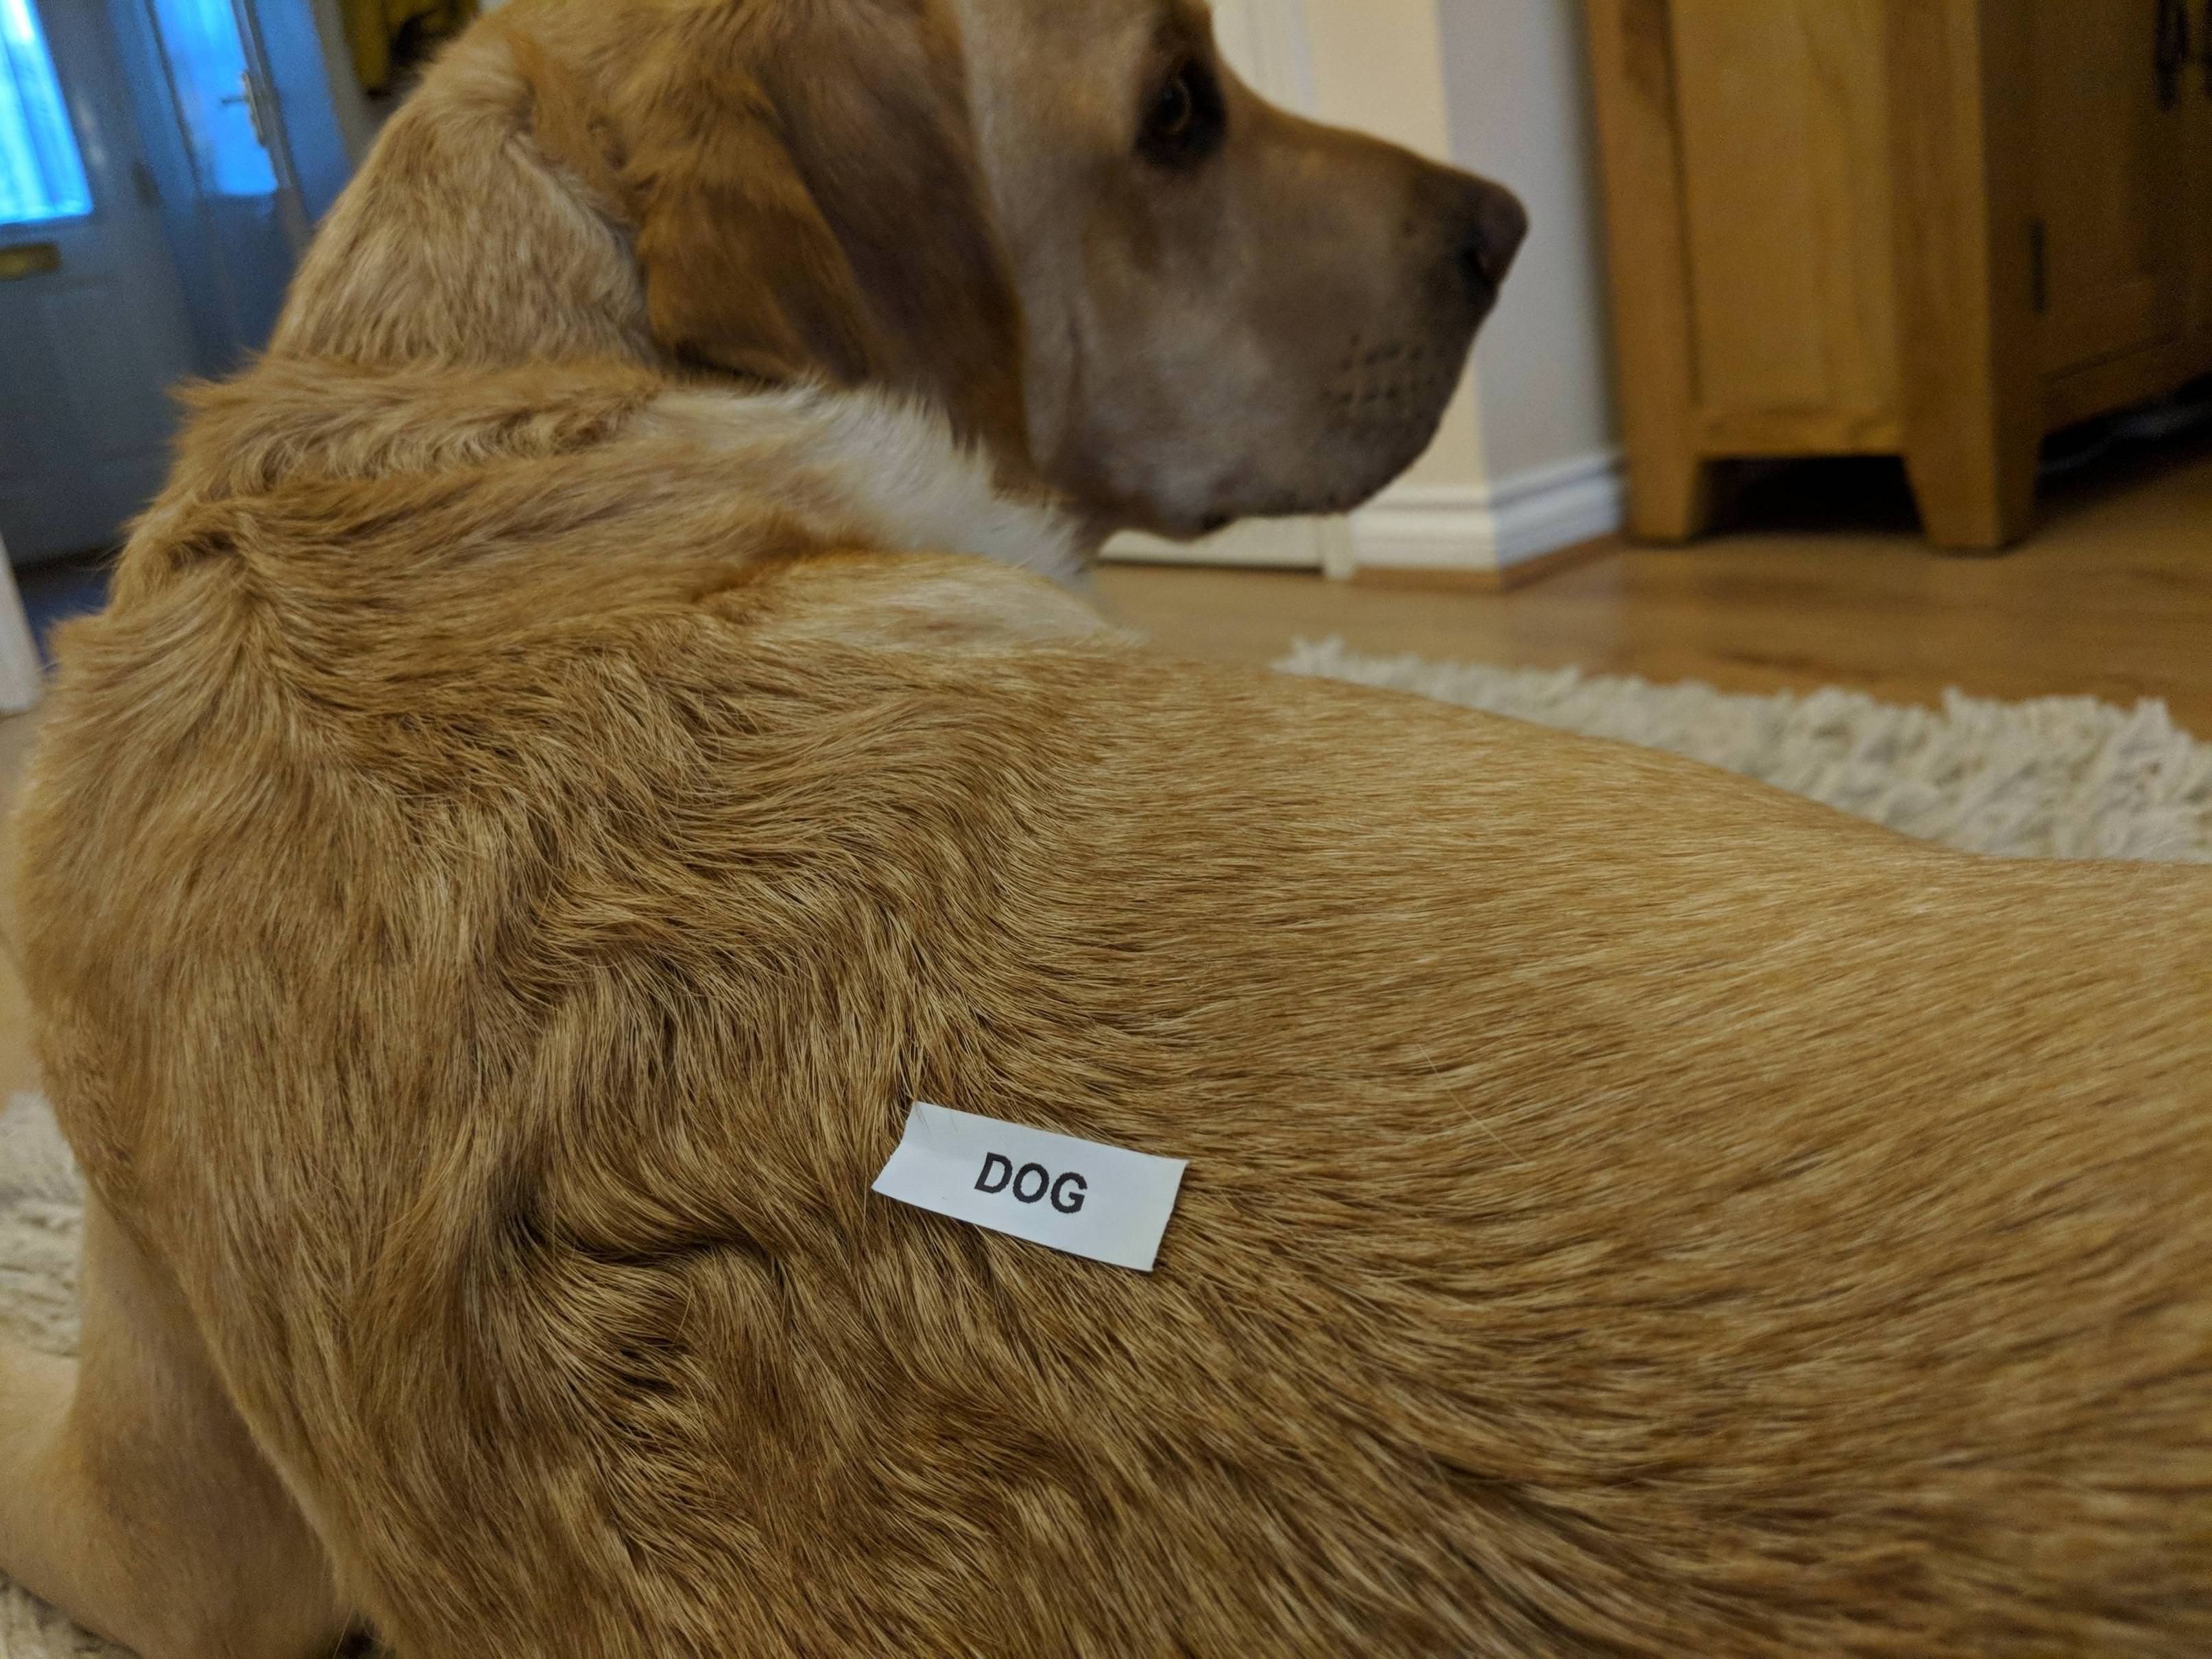 Looks like my wife has been putting the label maker to good use